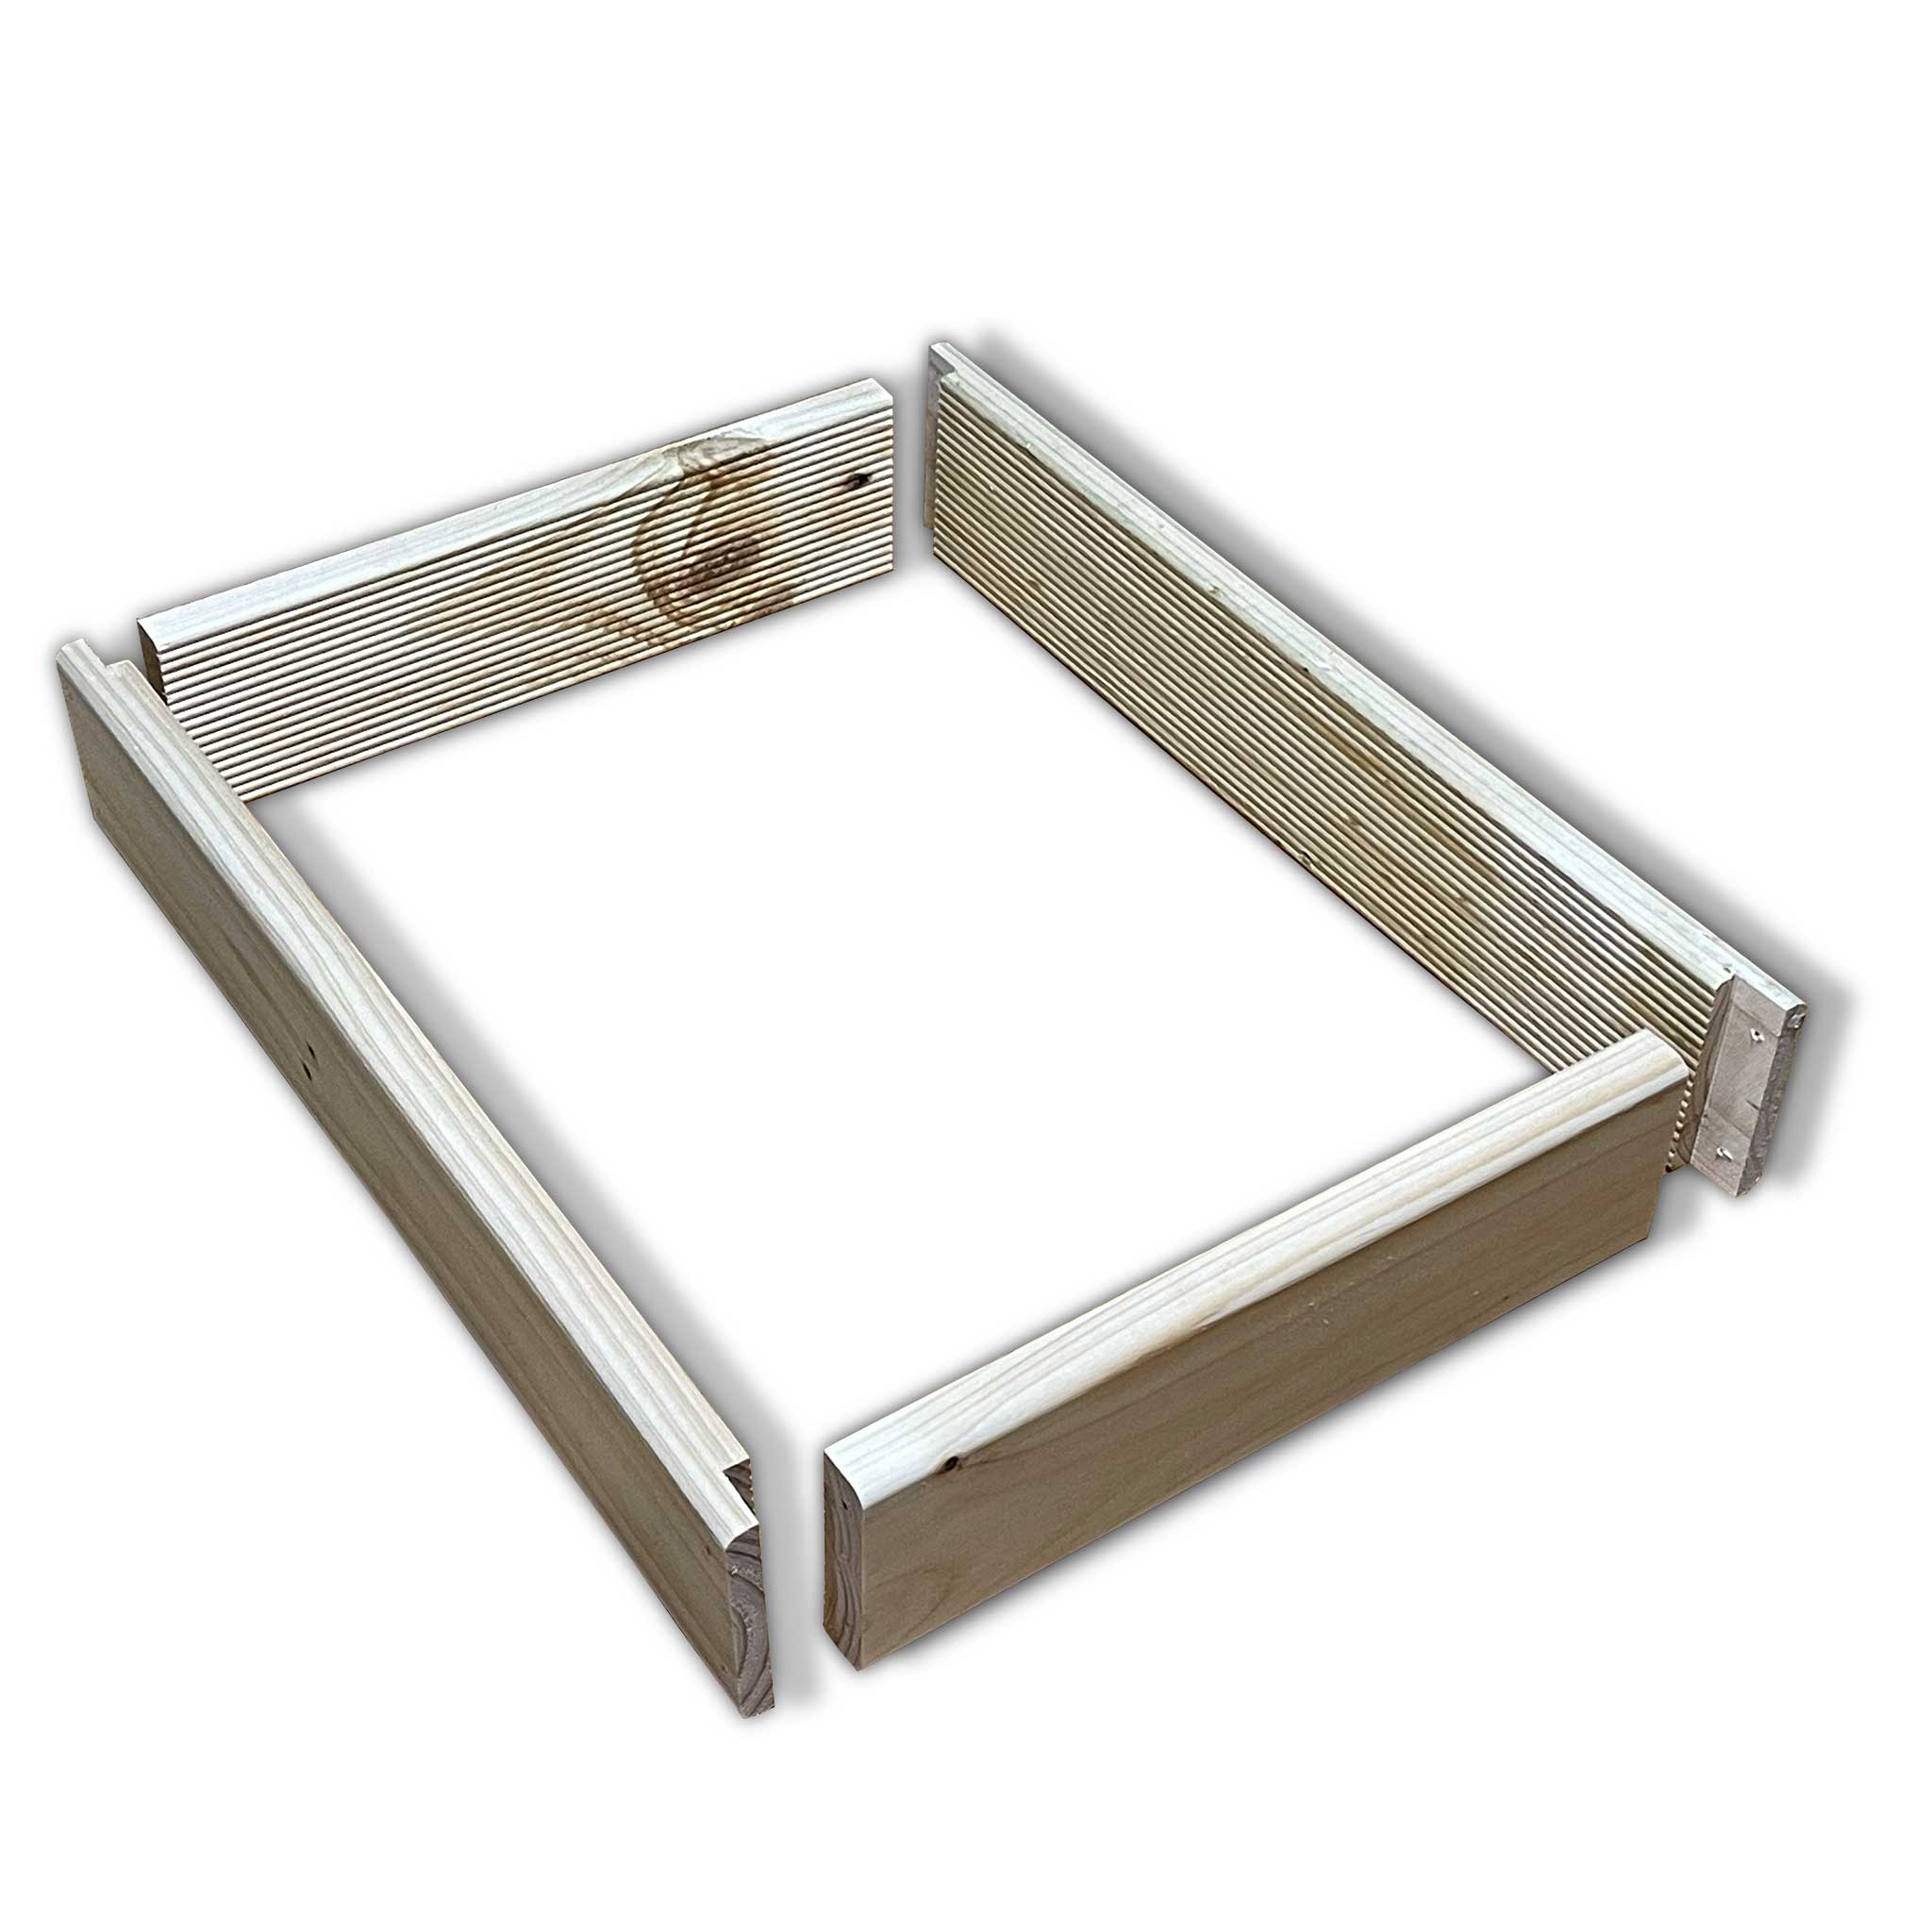 Rim Box Frame Housing for Ceracell and Other Beekeeping 8 Frame Top Feeders - Bee Feeders collection by Buzzbee Beekeeping Supplies